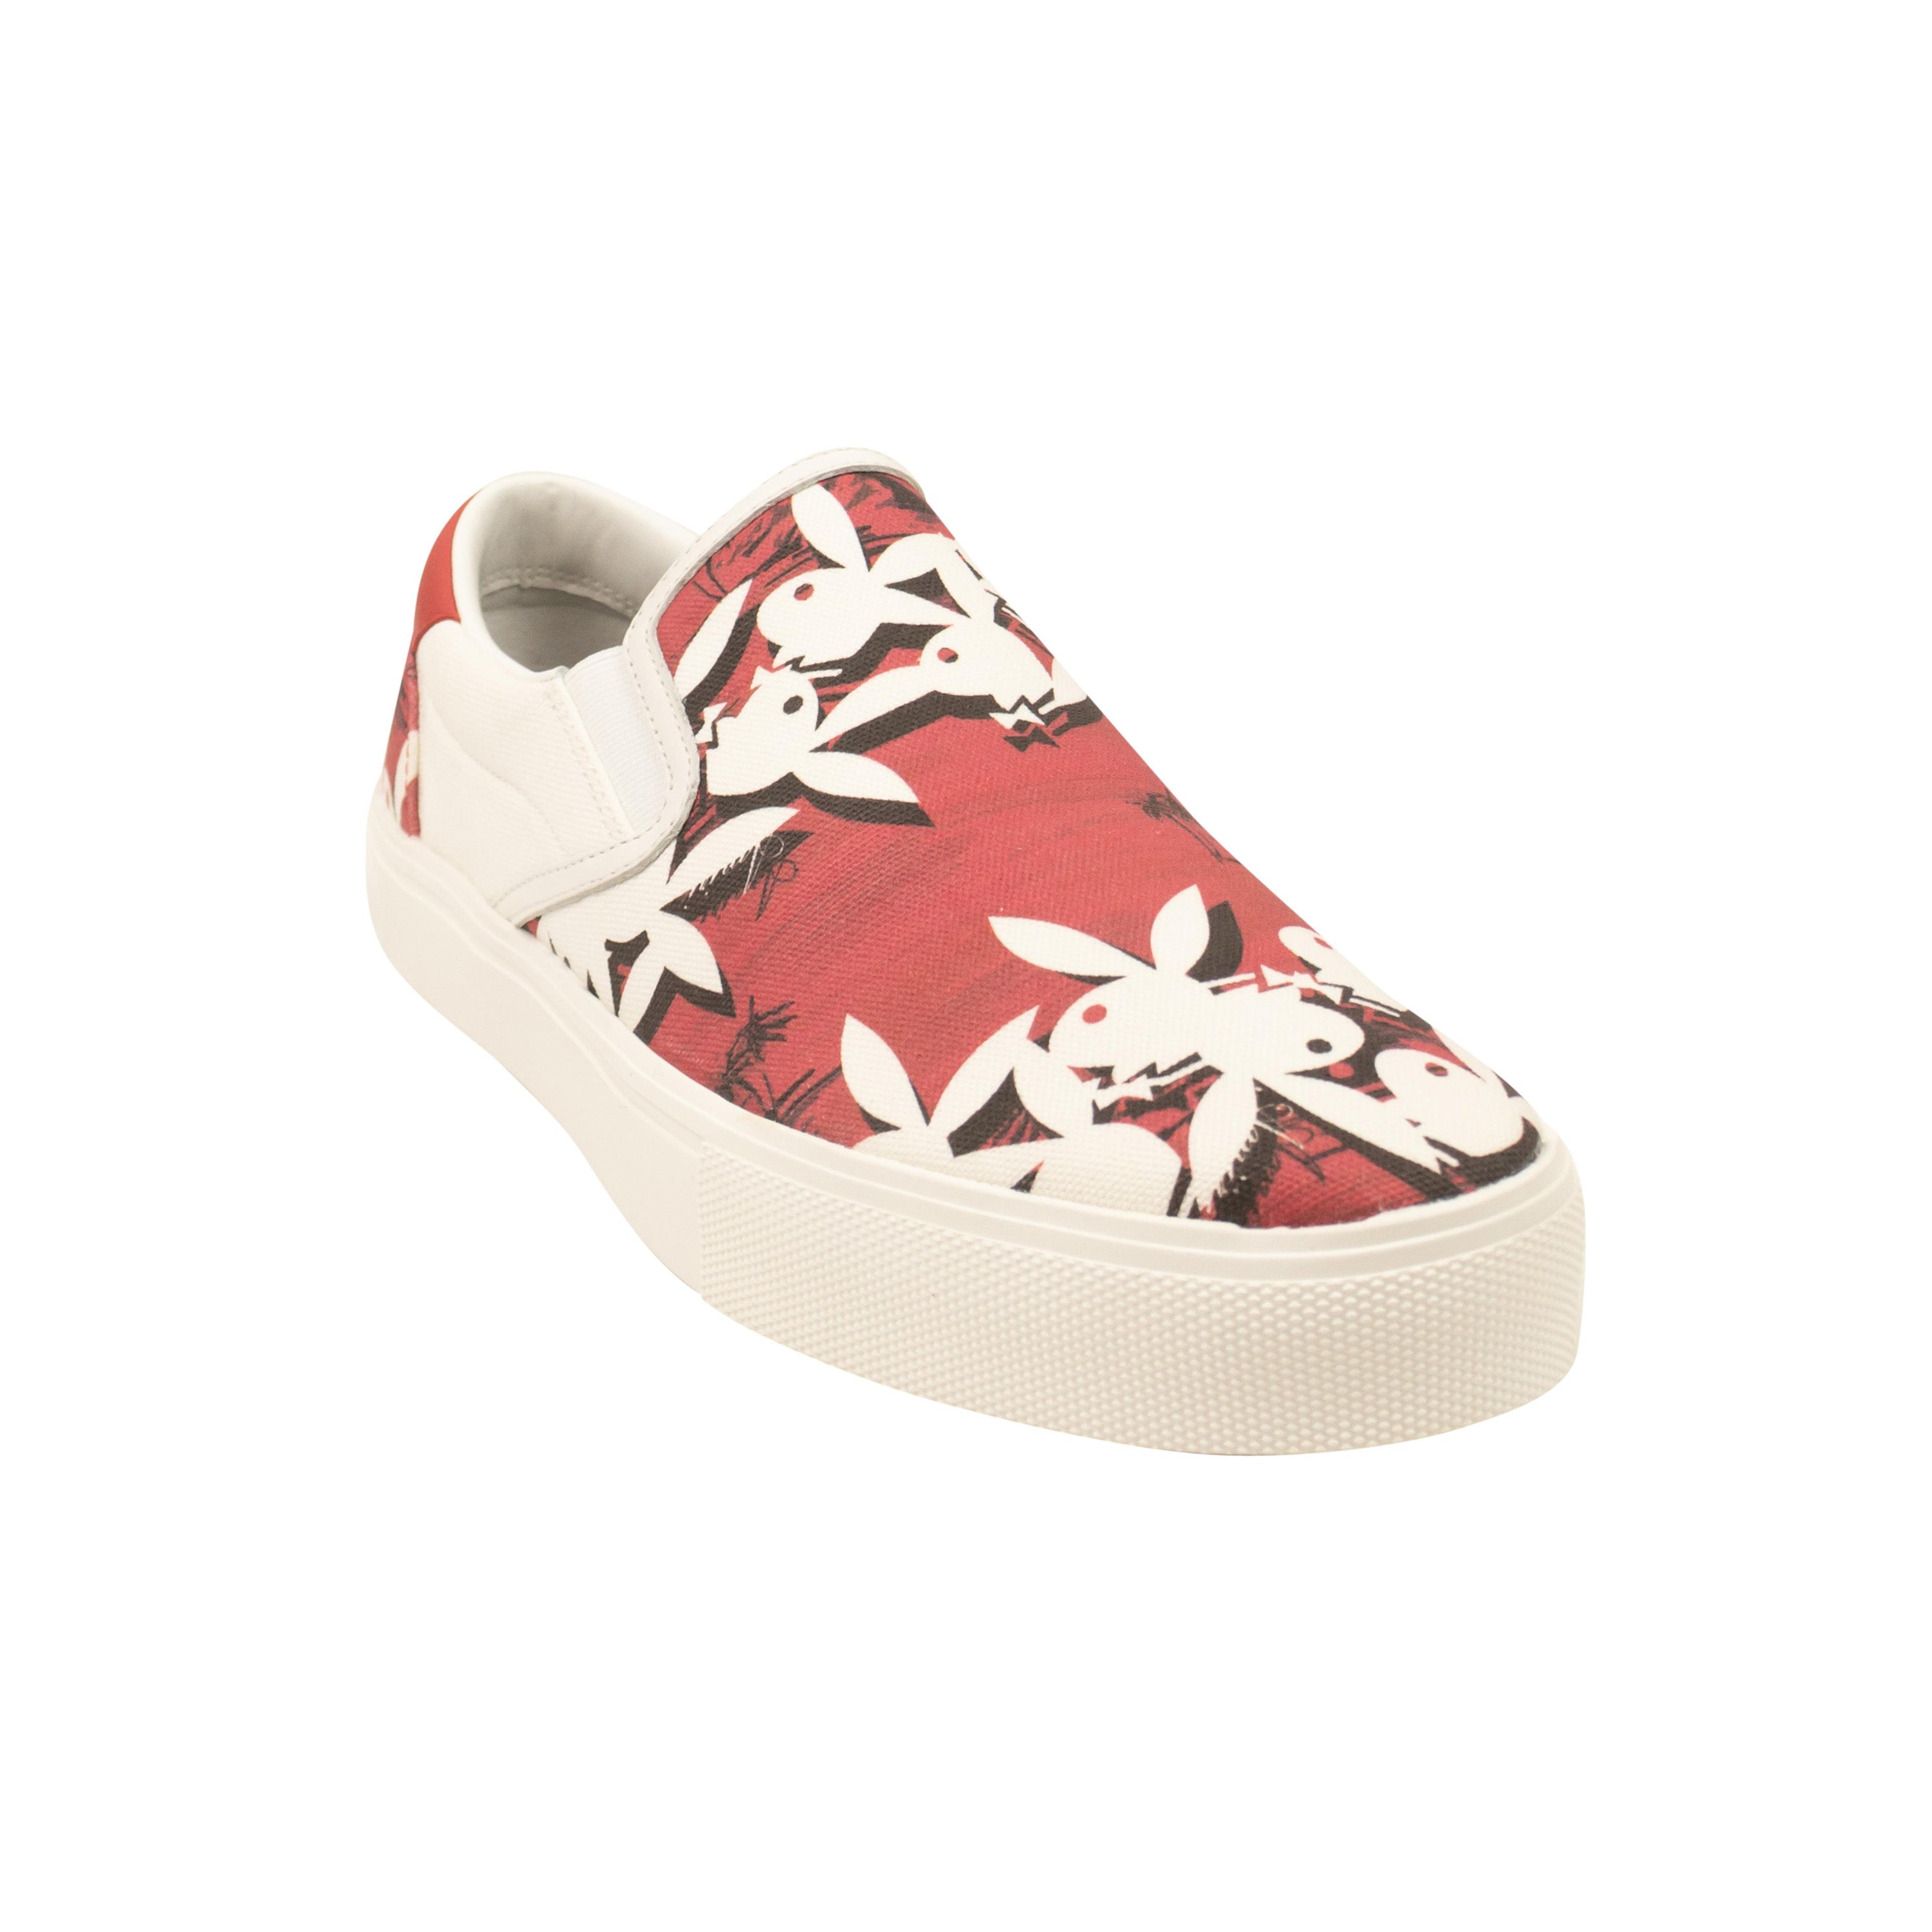 Alternate View 1 of Red And White Leather Playboy Slip On Sneakers